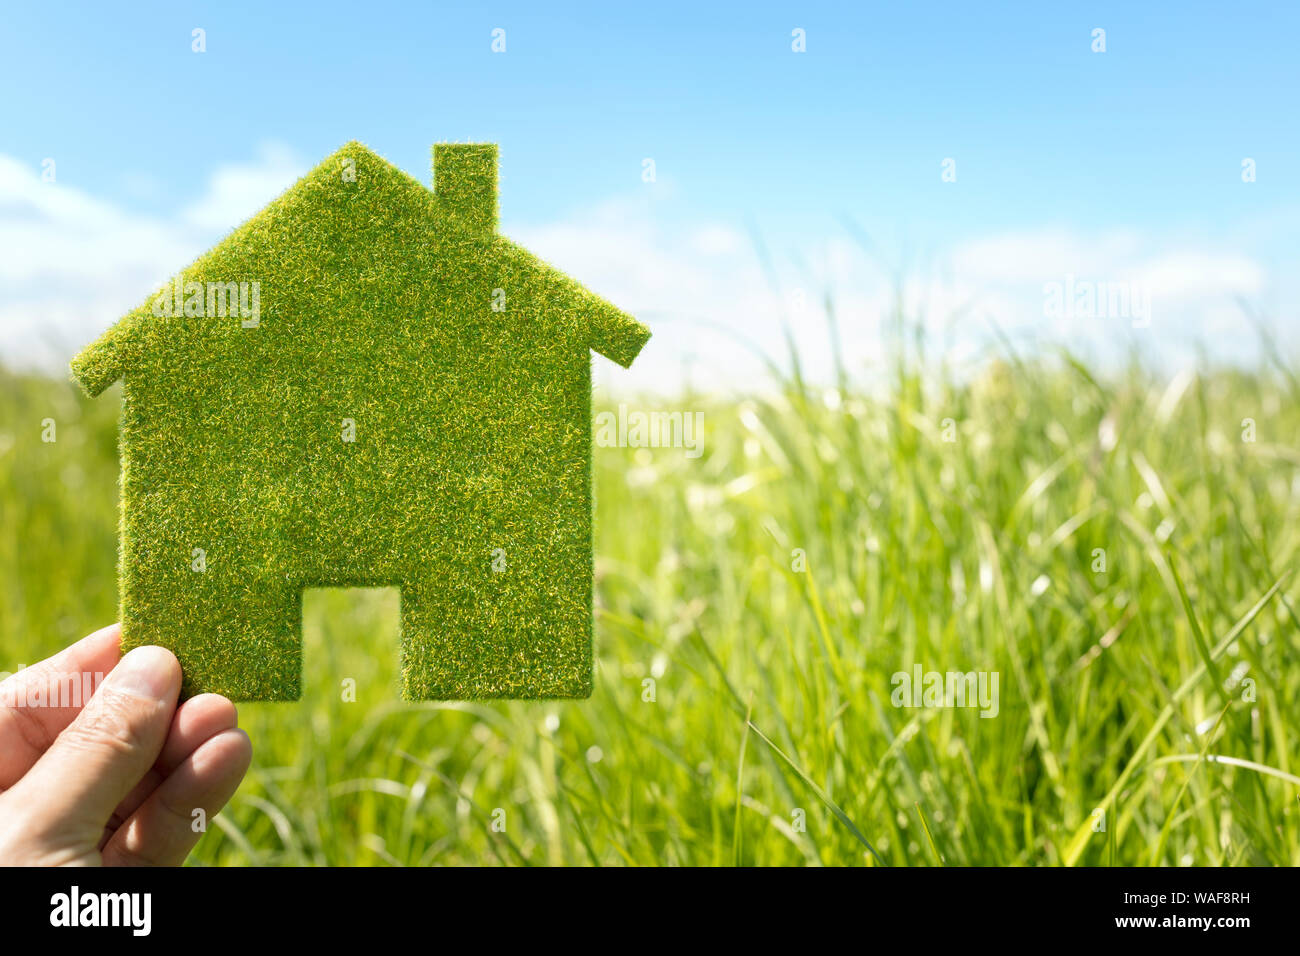 Green eco house environmental background in grass field for future residential building plot Stock Photo